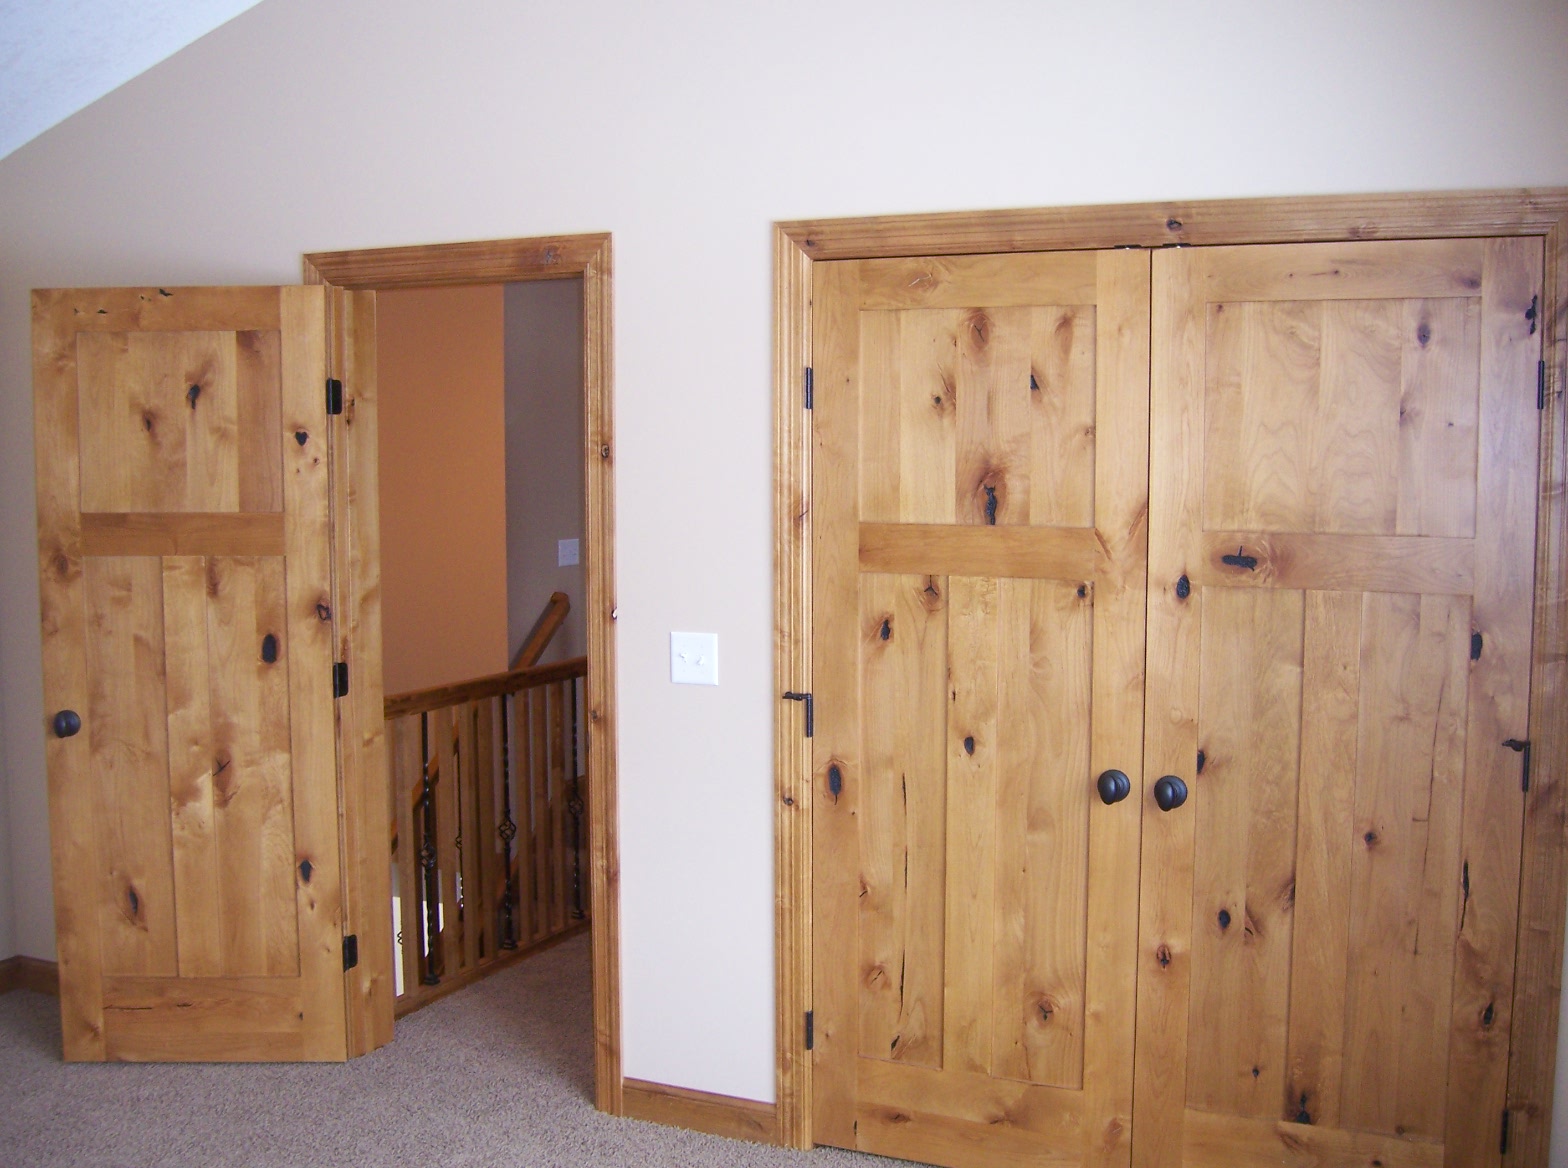 Knotty Alder Doors are throughout the Home